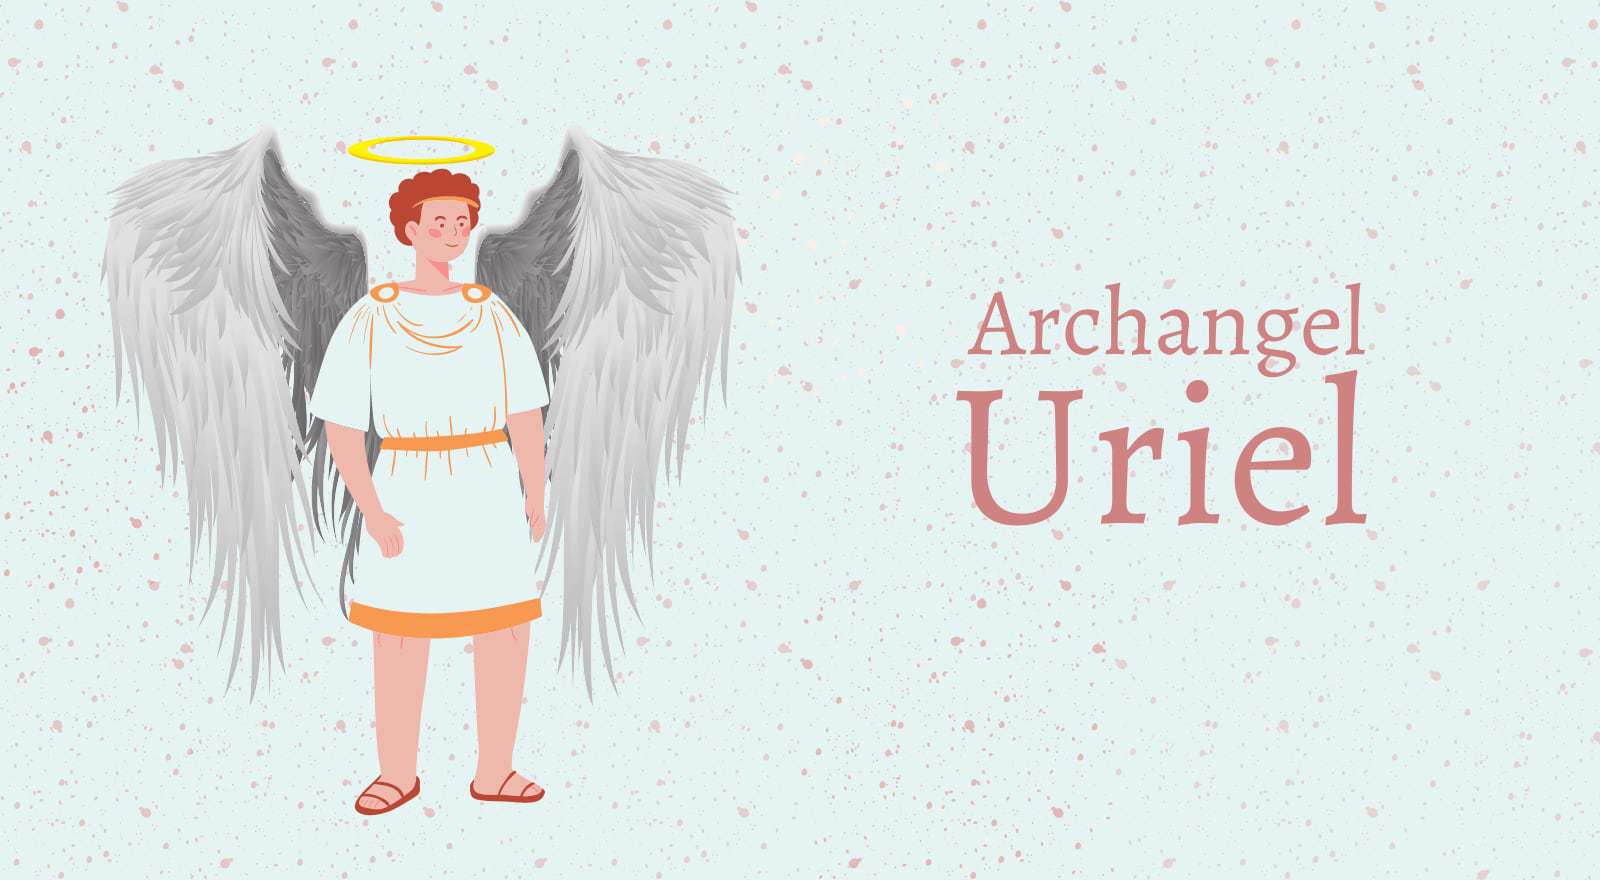 Who is Archangel Uriel? The Angel of Truth